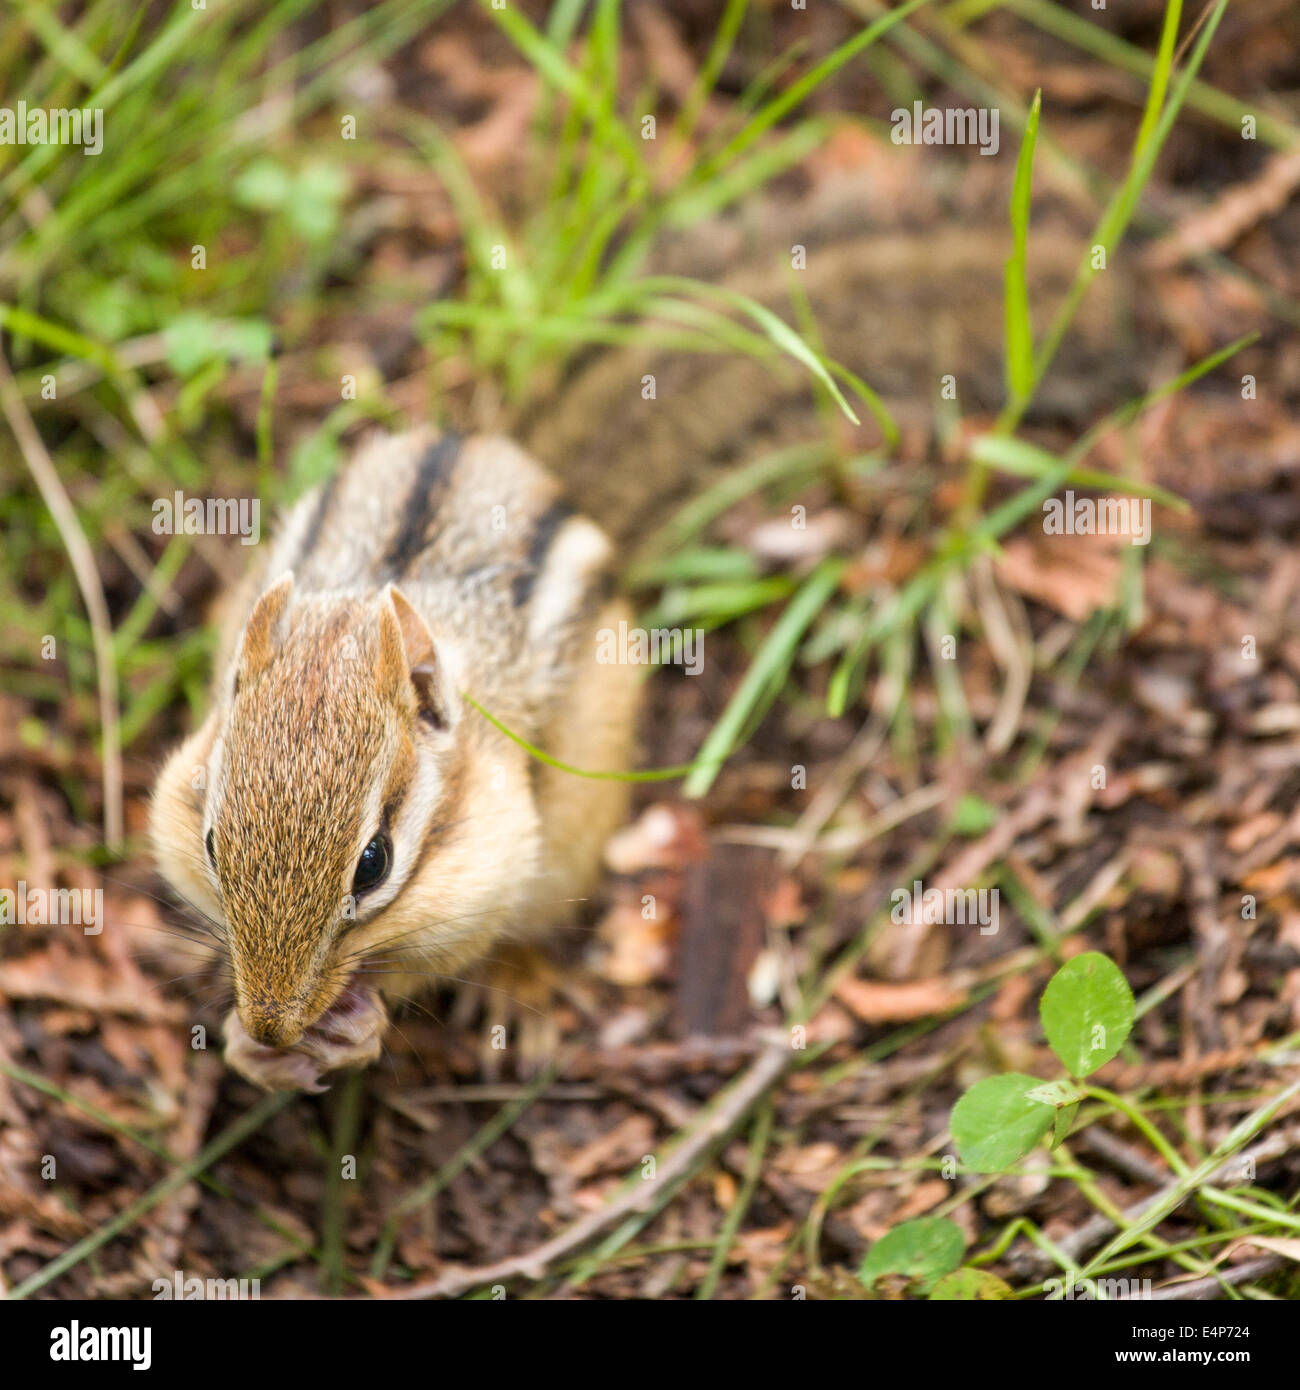 Chipmunk filling his cheeks. A small chipmunk on the forest floor fills his cheek with a recently found seed. Stock Photo